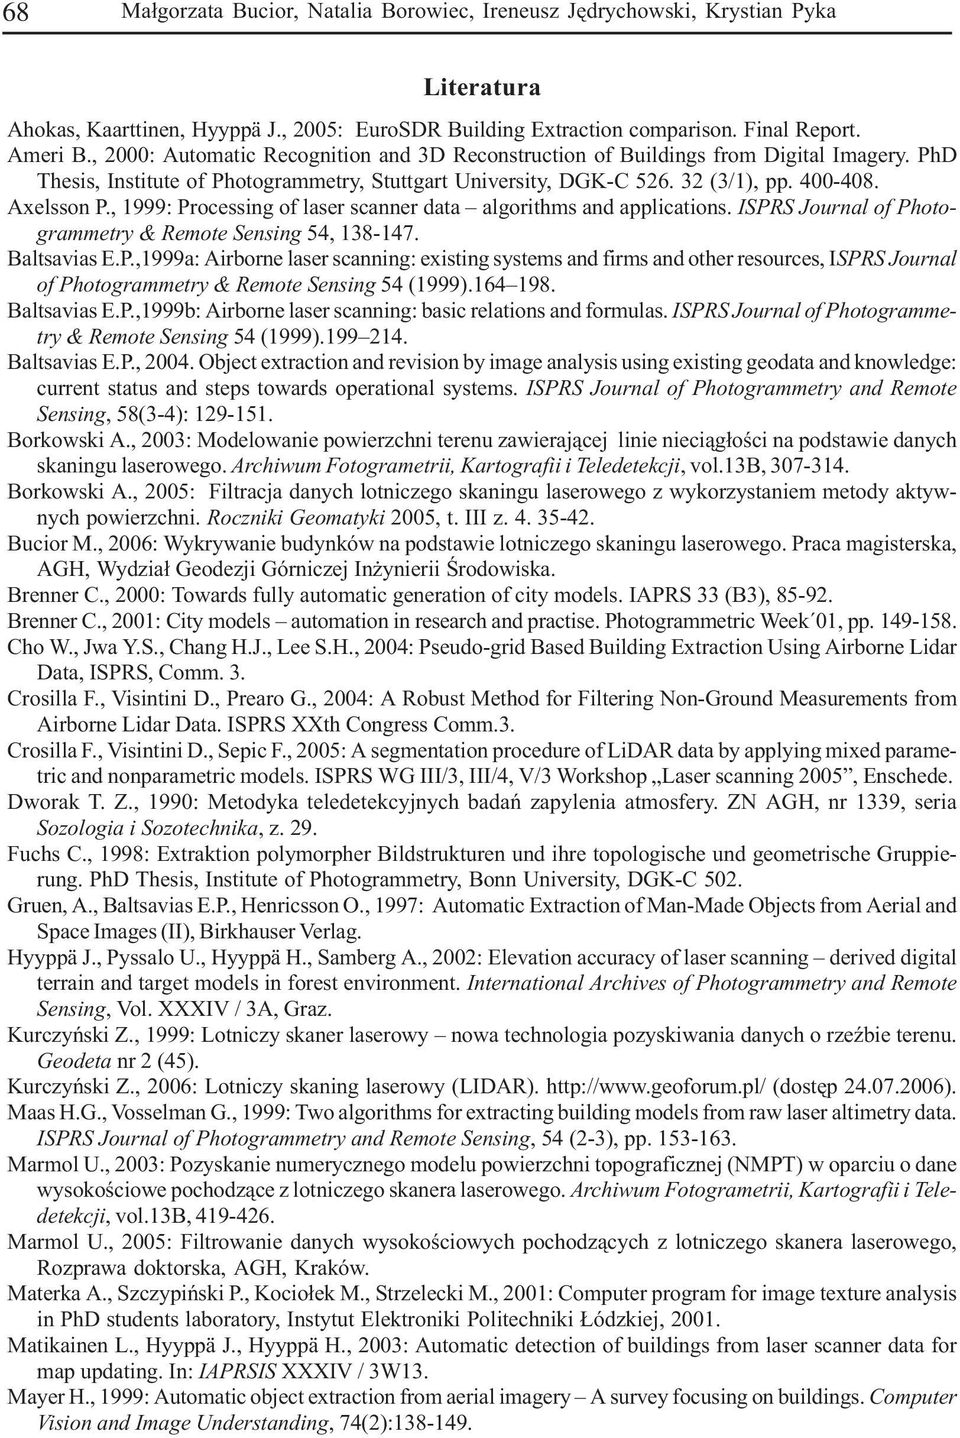 , 1999: Processing of laser scanner data algorithms and applications. ISPRS Journal of Photogrammetry & Remote Sensing 54, 138-147. Baltsavias E.P.,1999a: Airborne laser scanning: existing systems and firms and other resources, ISPRS Journal of Photogrammetry & Remote Sensing 54 (1999).